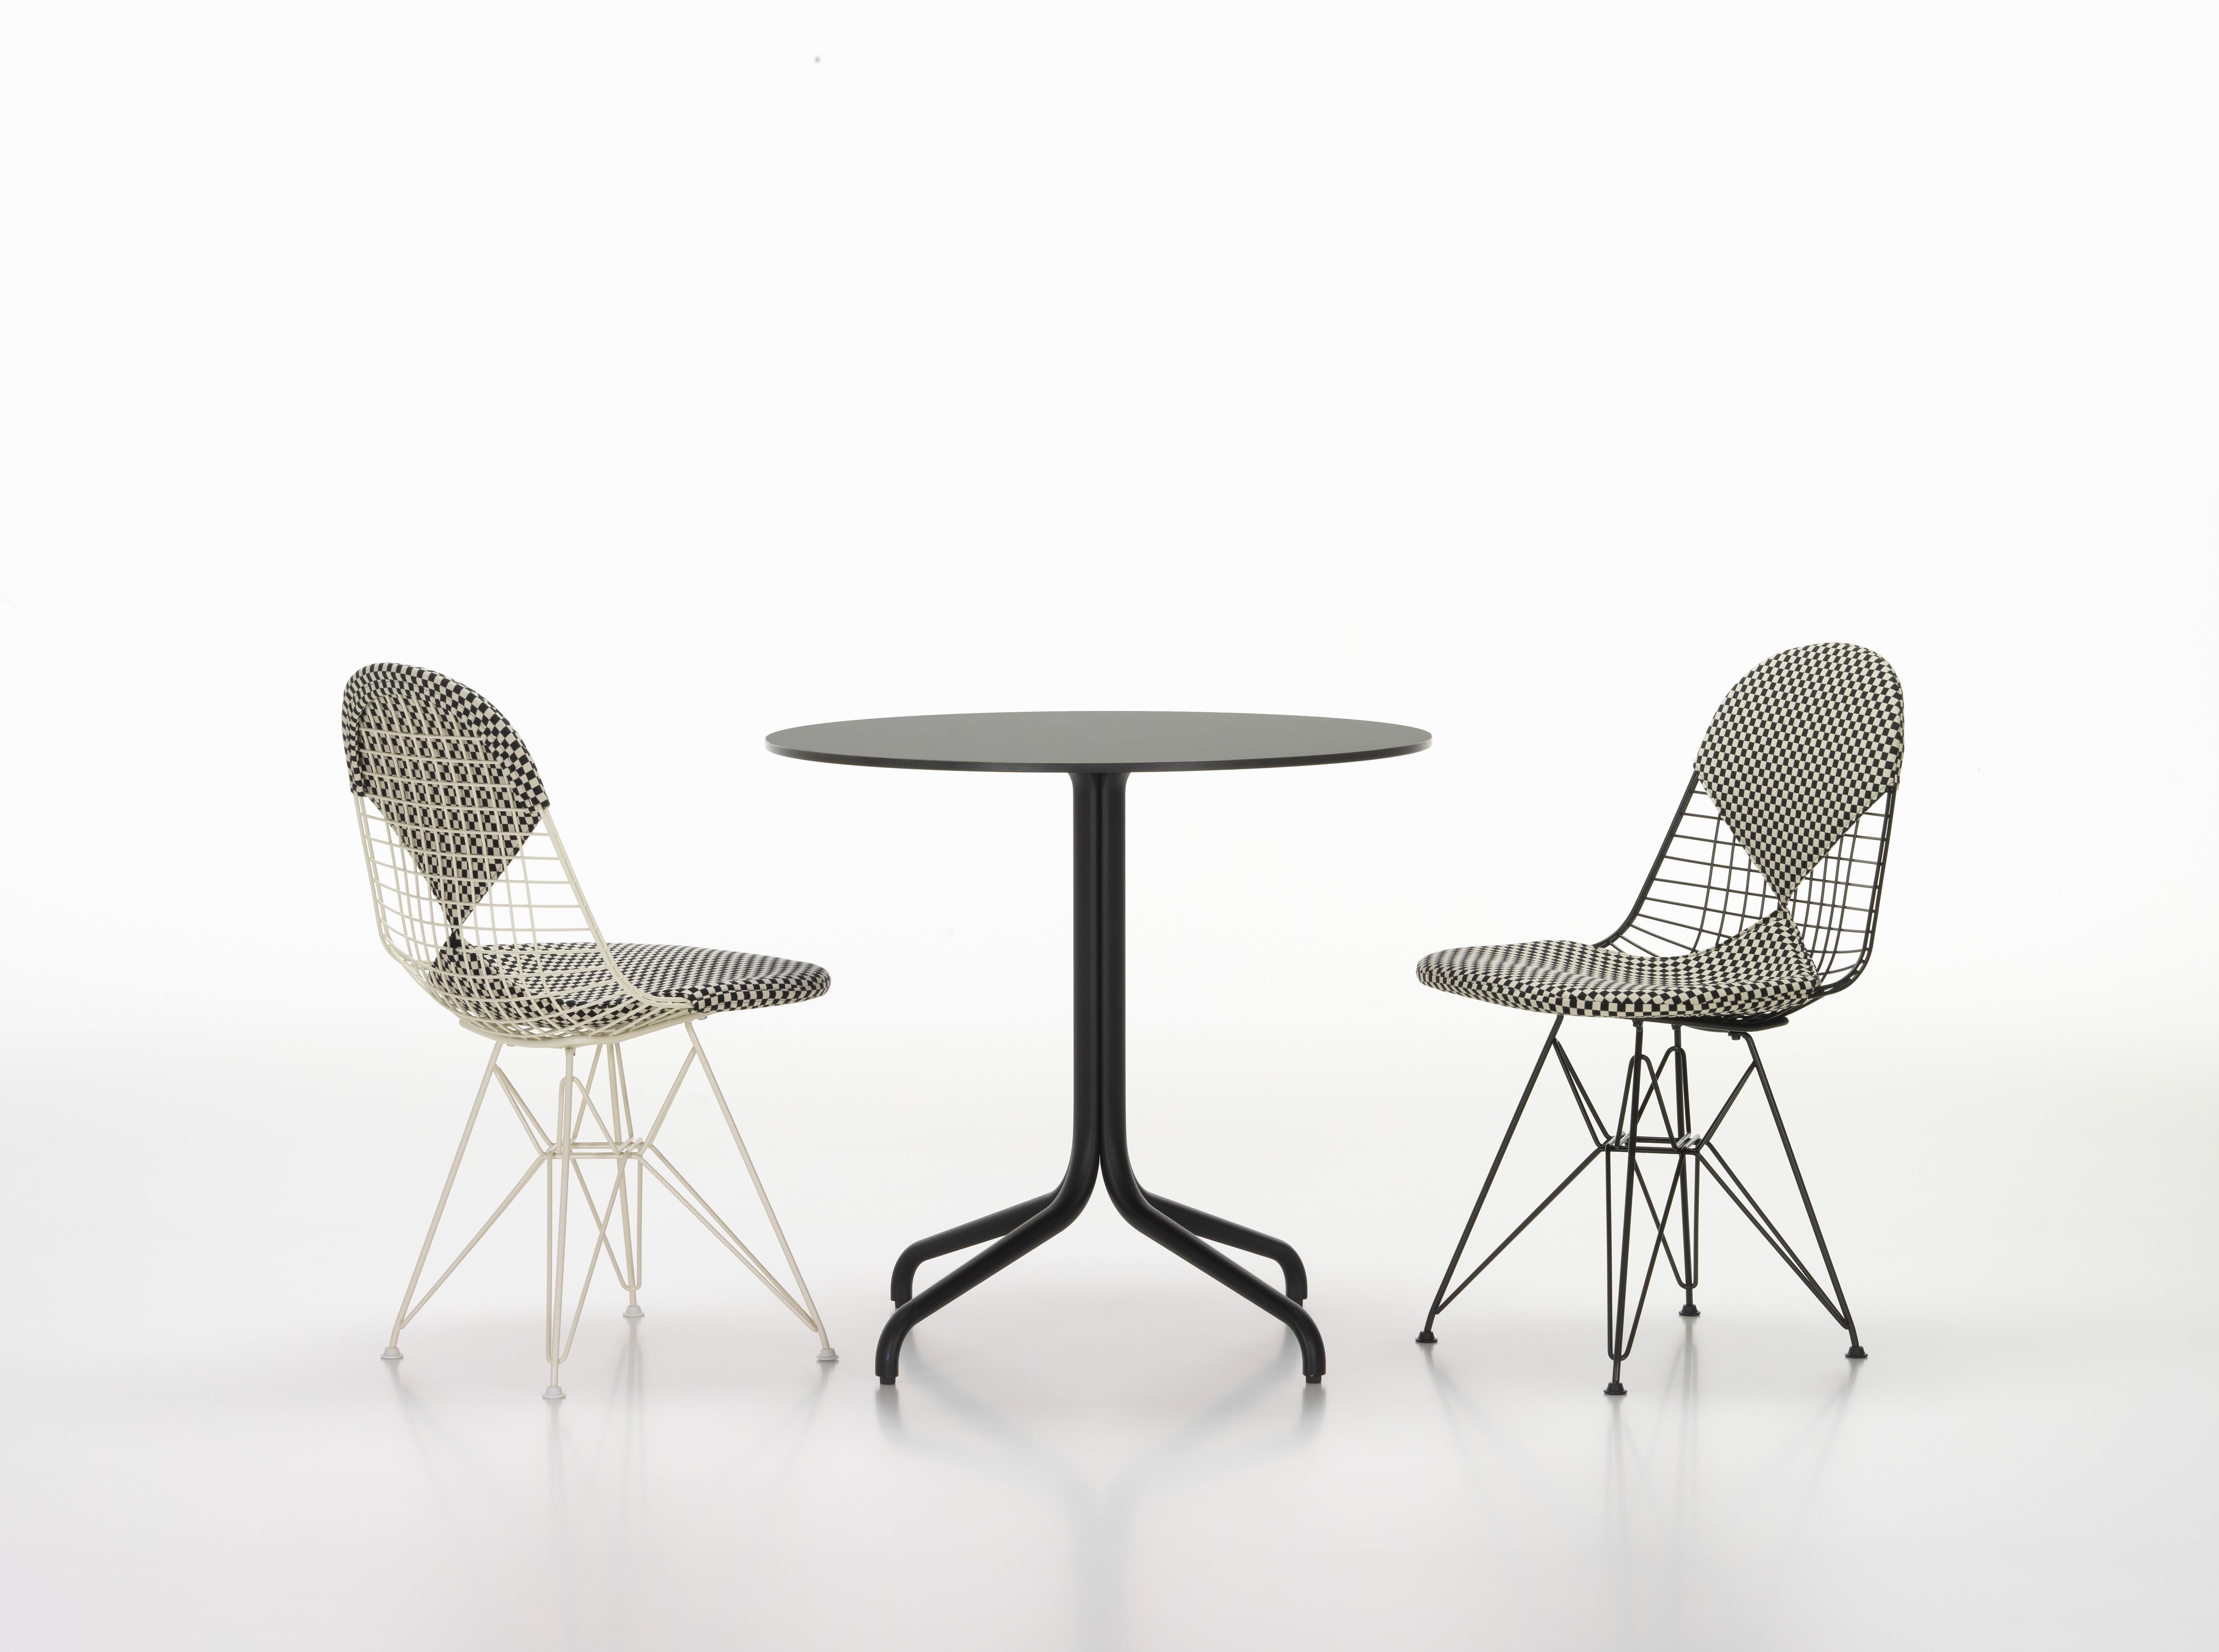 Swiss Vitra Belleville Round Table Outdoor in Black by Ronan & Erwan Bouroullec For Sale